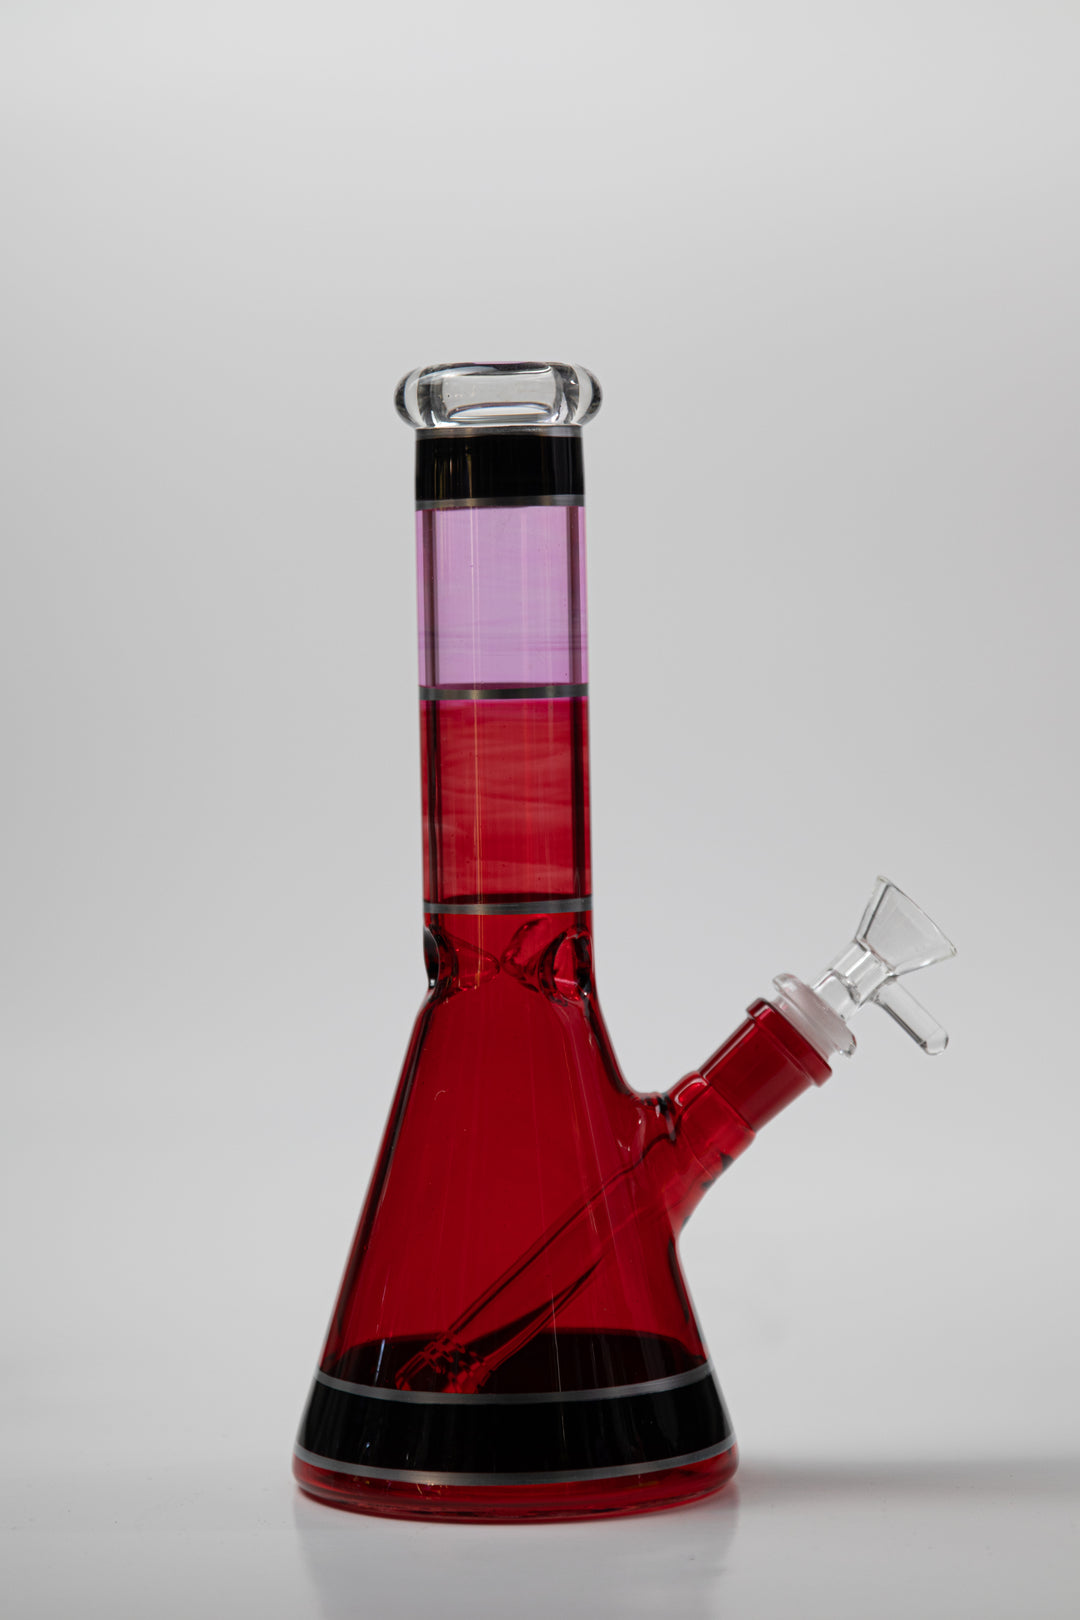 Beaker shape classic bong black mouth opening with a pink/ red body black base . Straight down stem Comes with a 14 mm bowl piece for weed